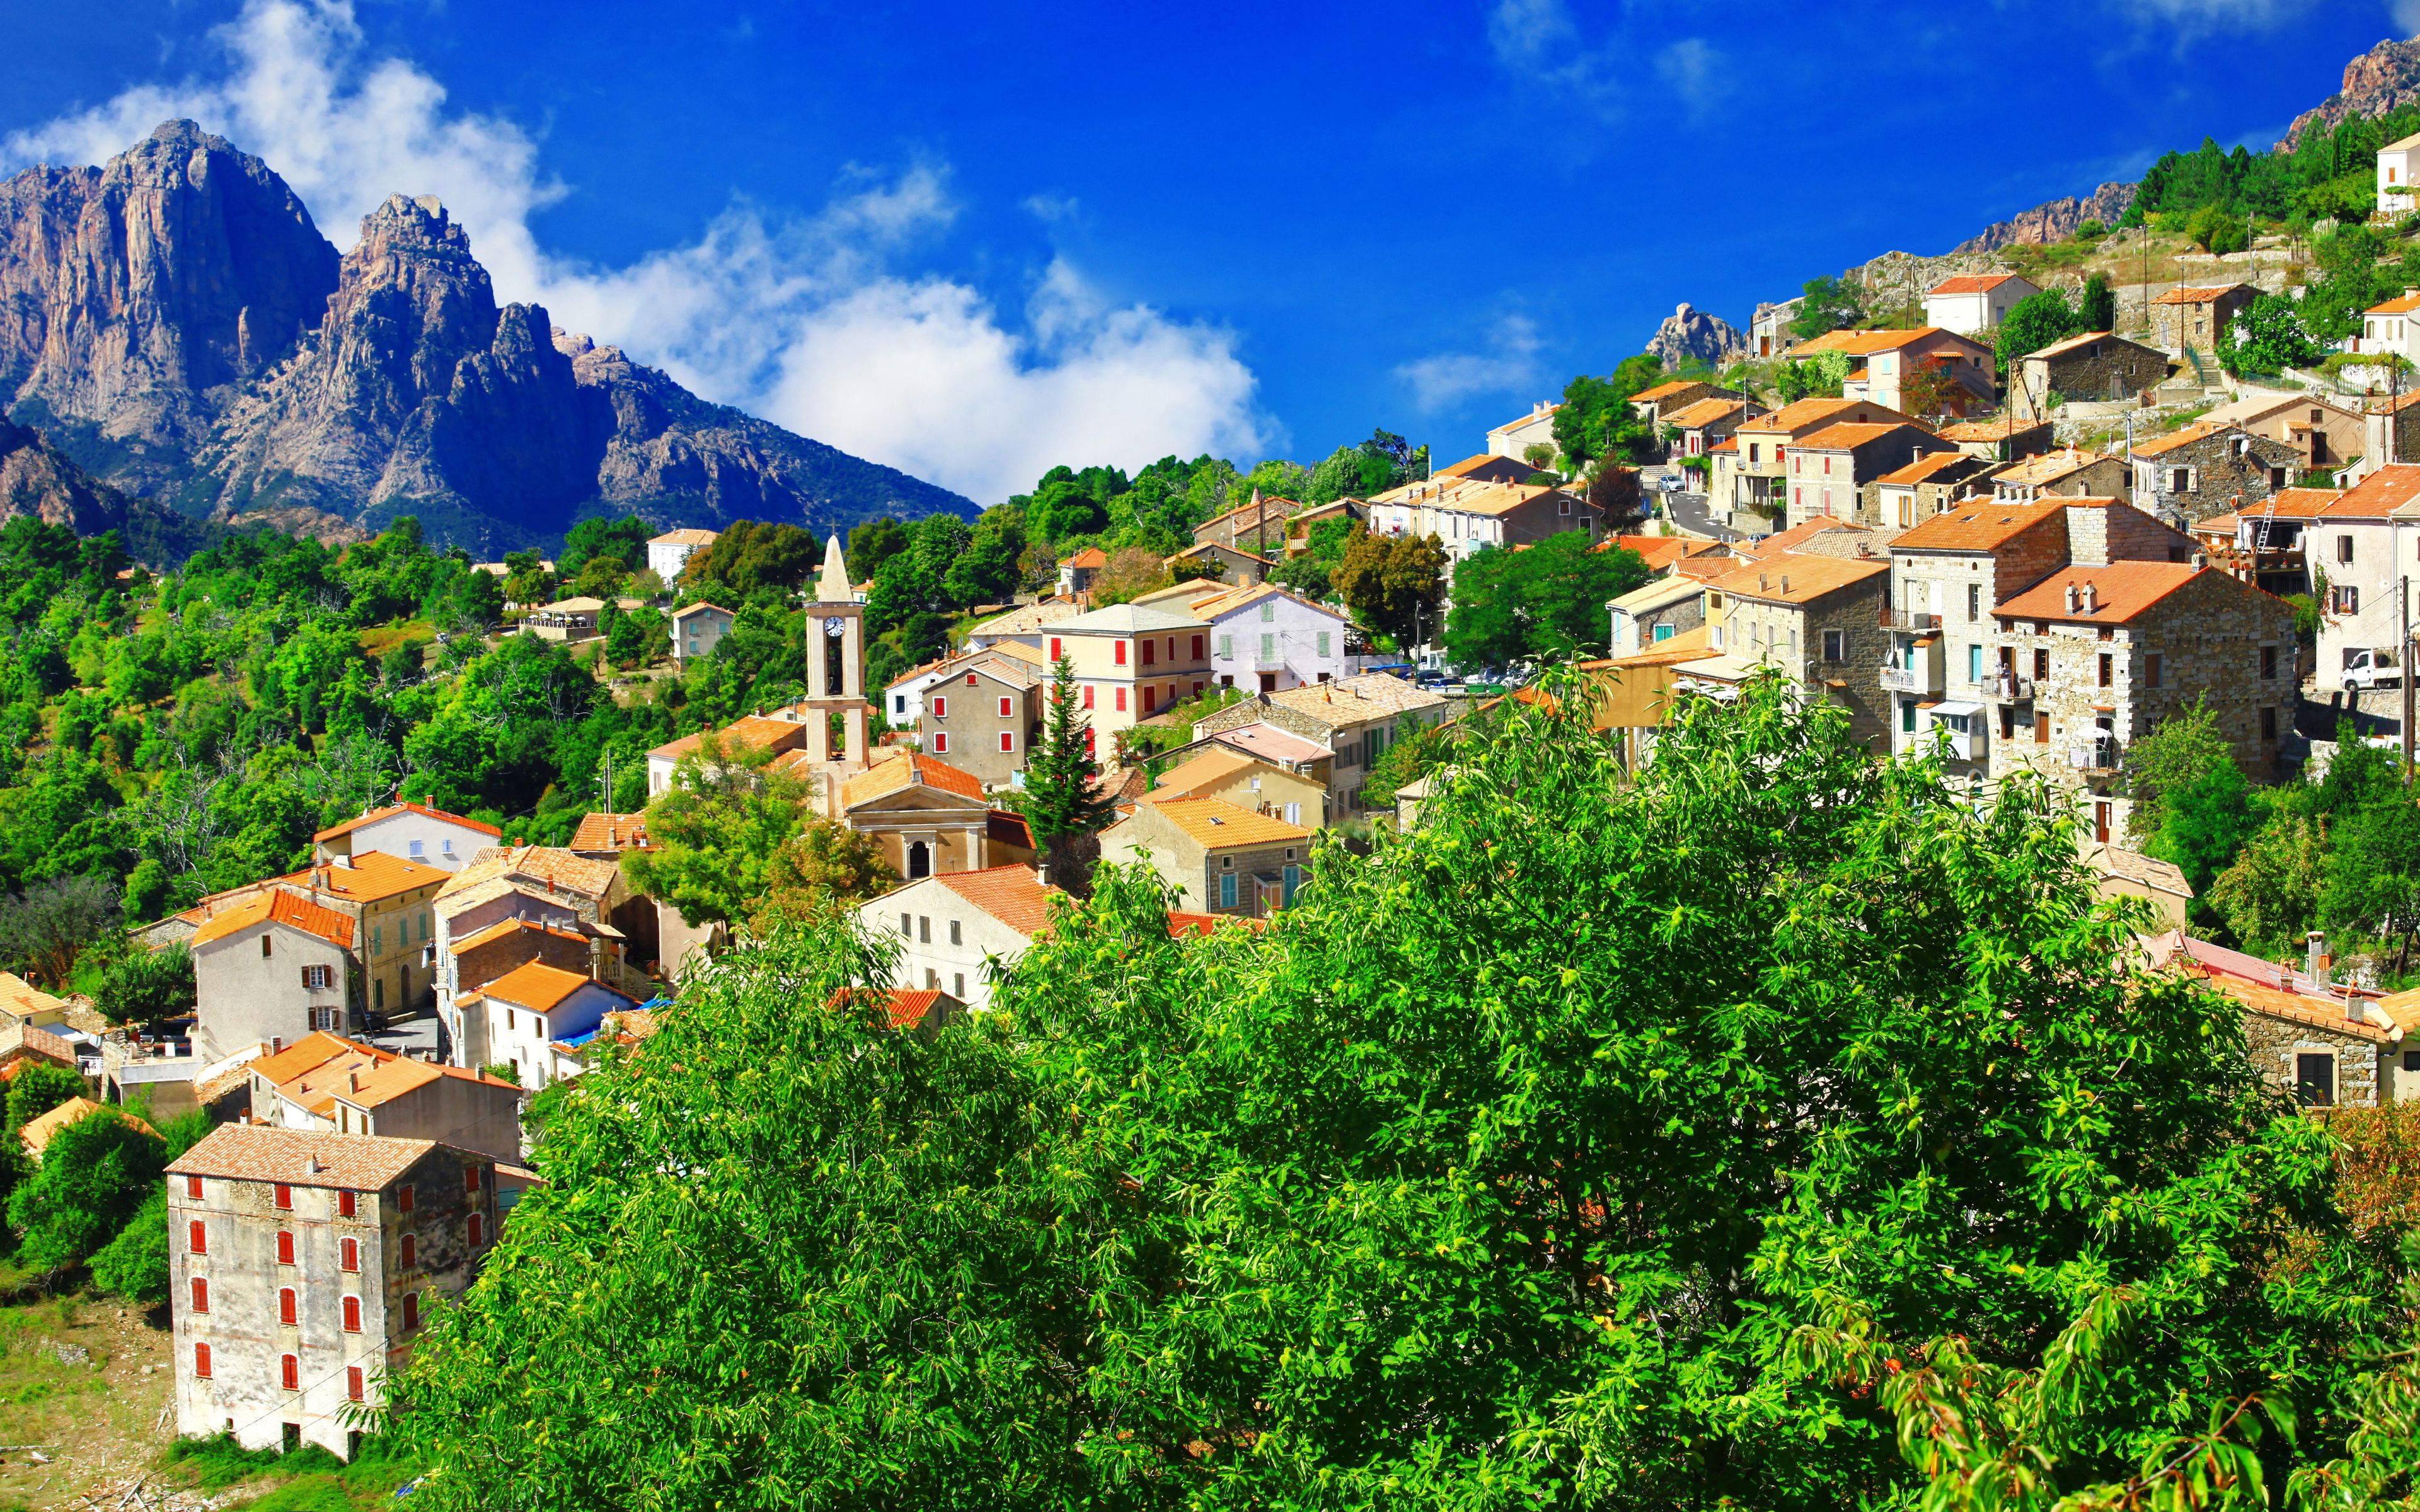 Download wallpaper Corsica, 4k, mountains, summer, village, France, Europe for desktop with resolution 3840x2400. High Quality HD picture wallpaper